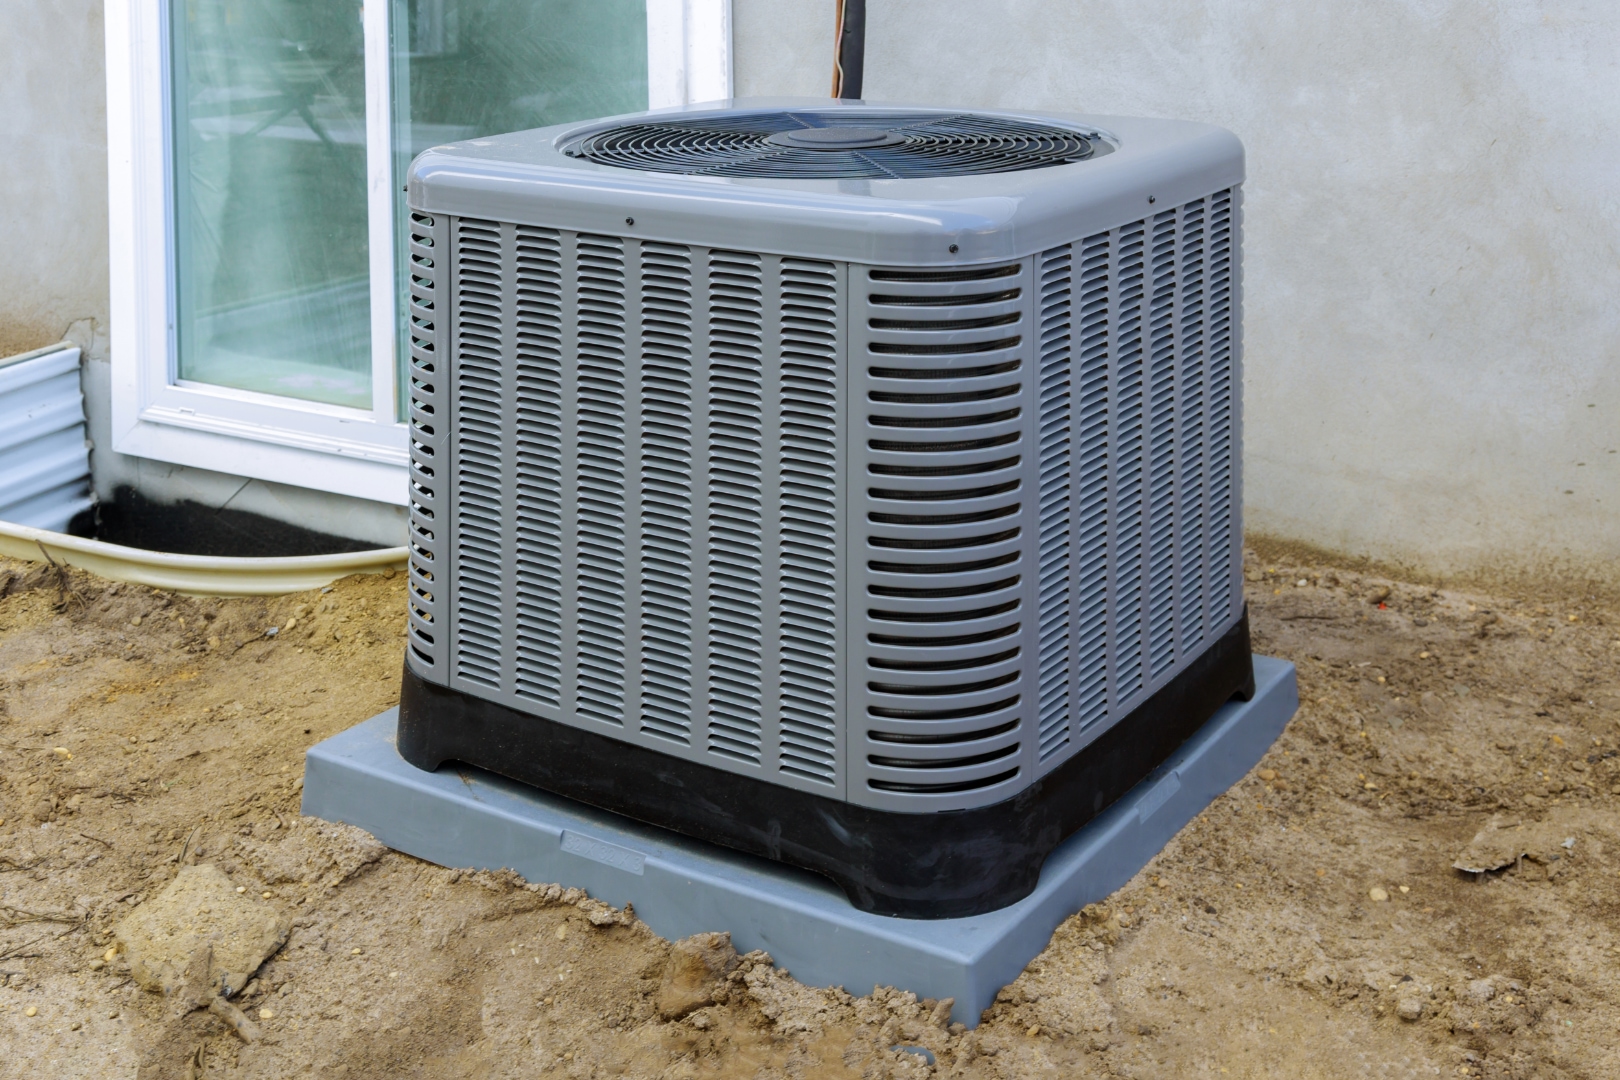 Leave Your Air Conditioner Running While Away on Vacation